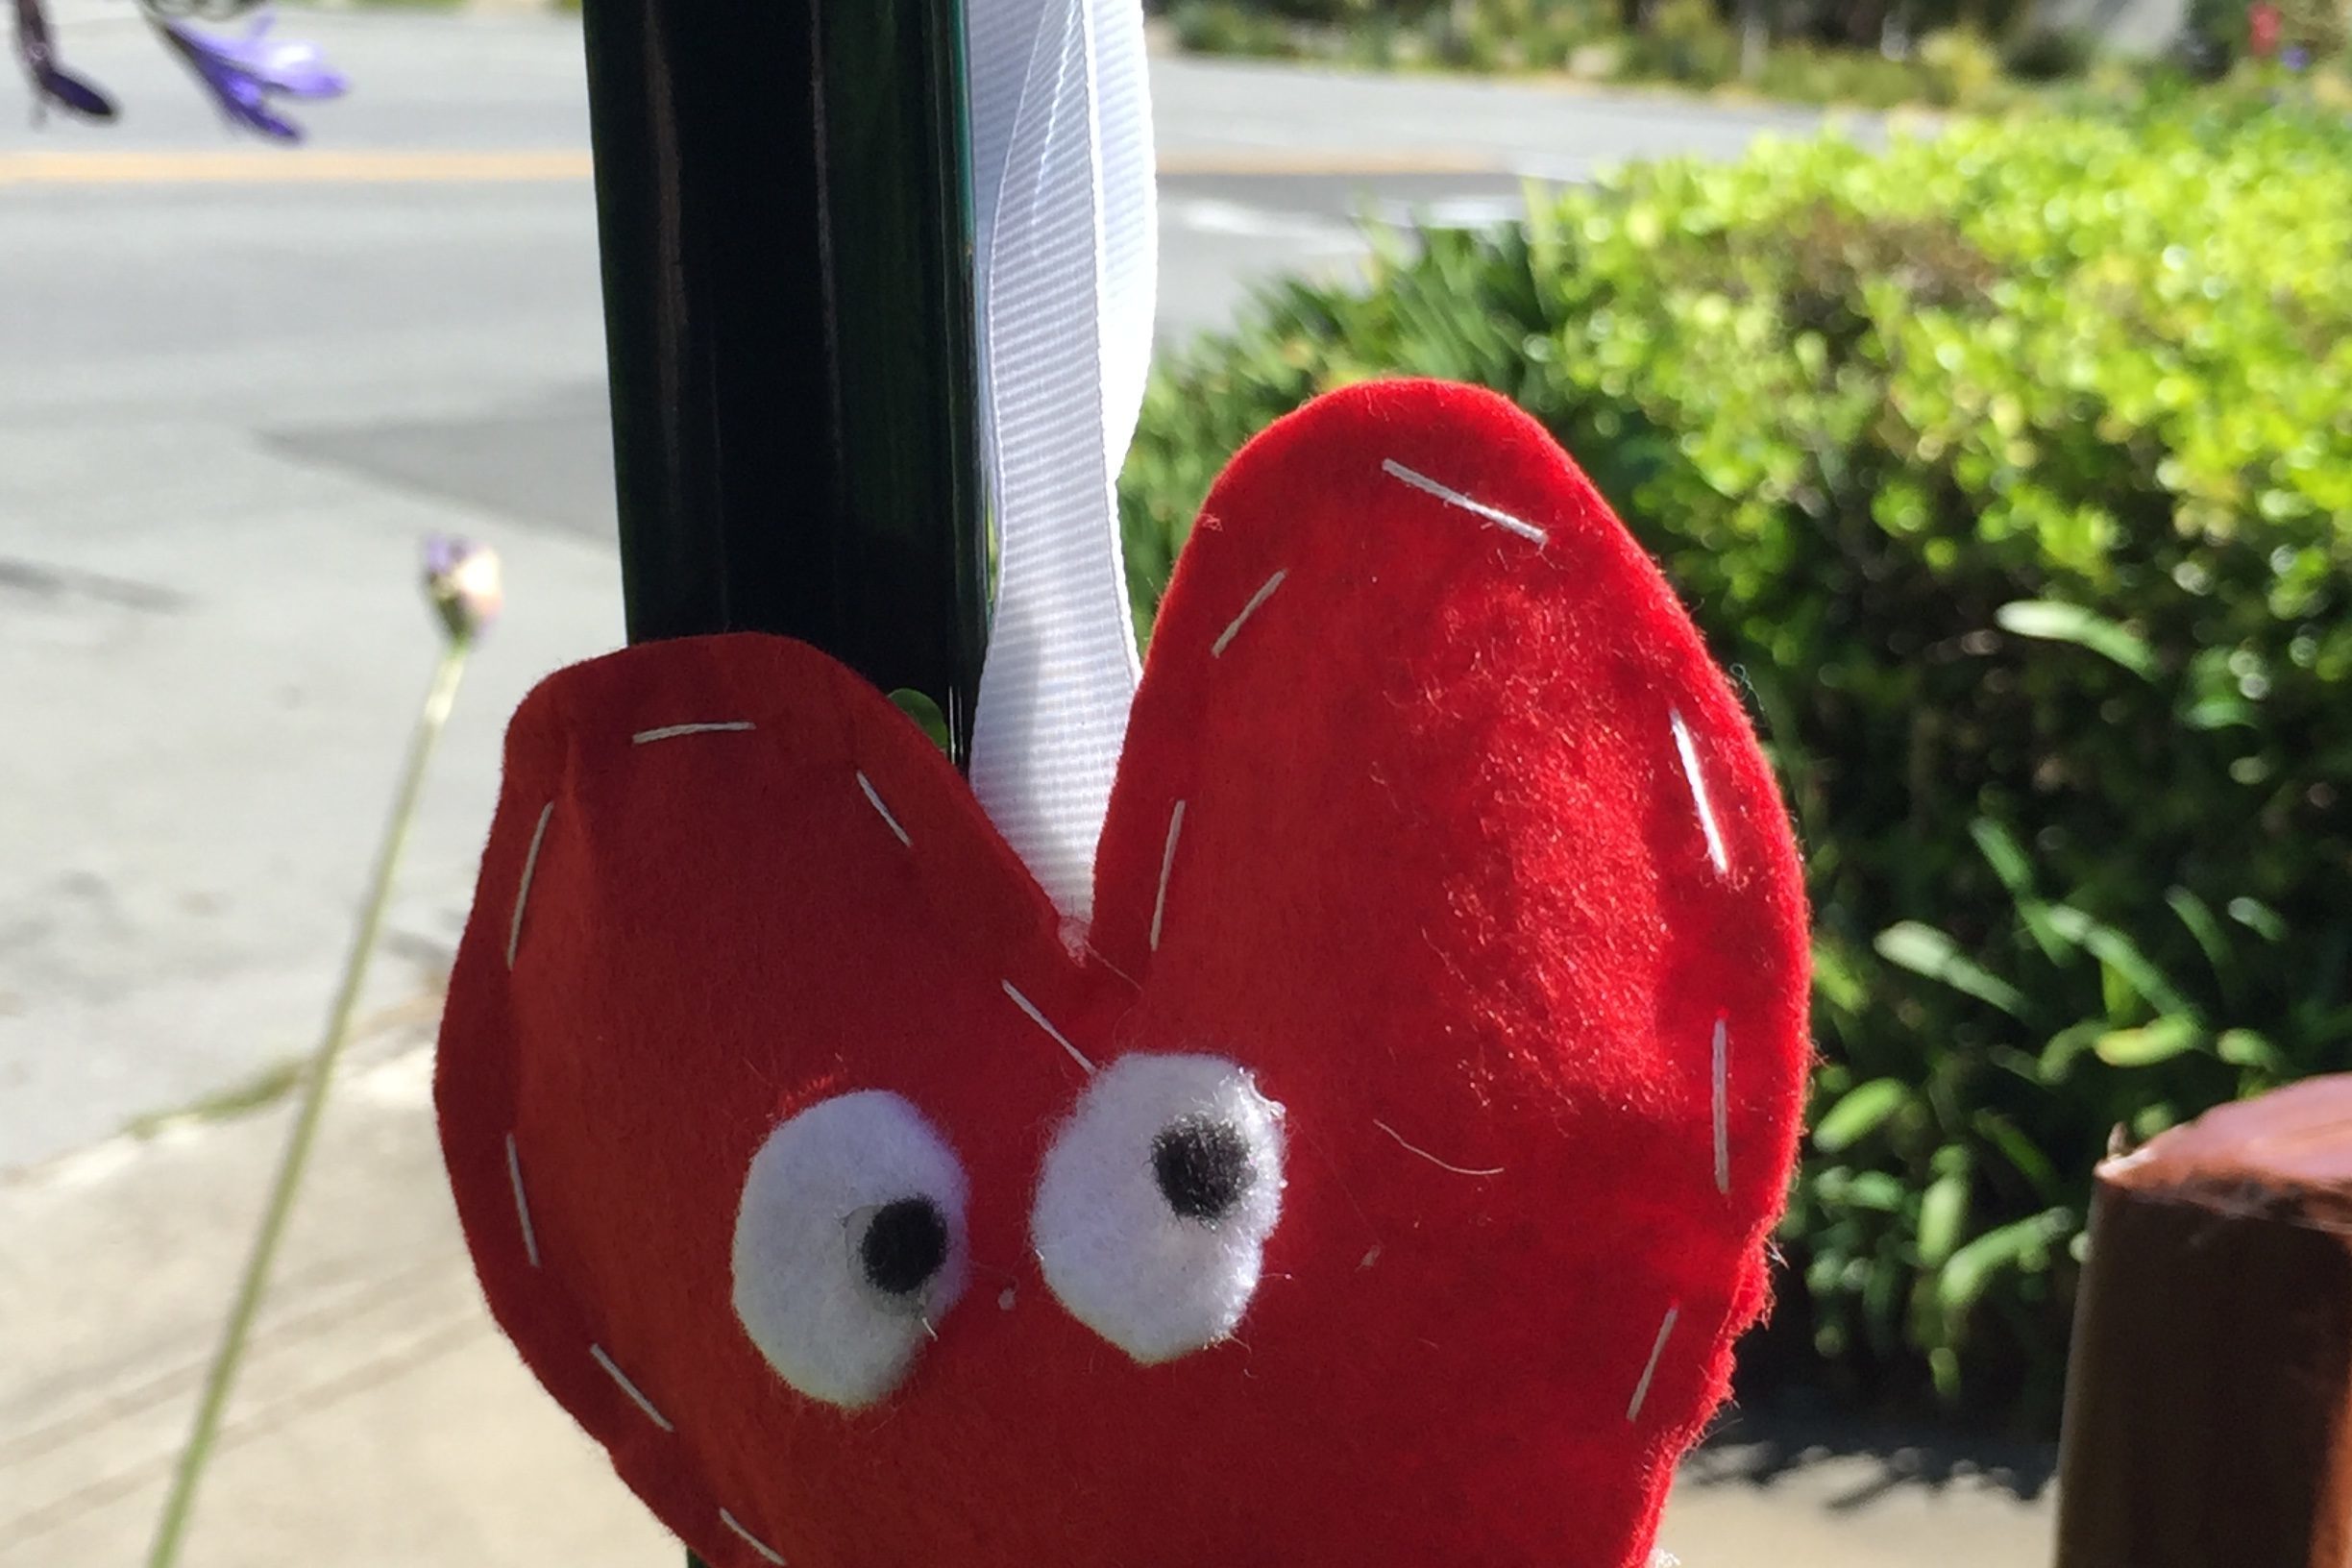 Felt heart hanging from a pole